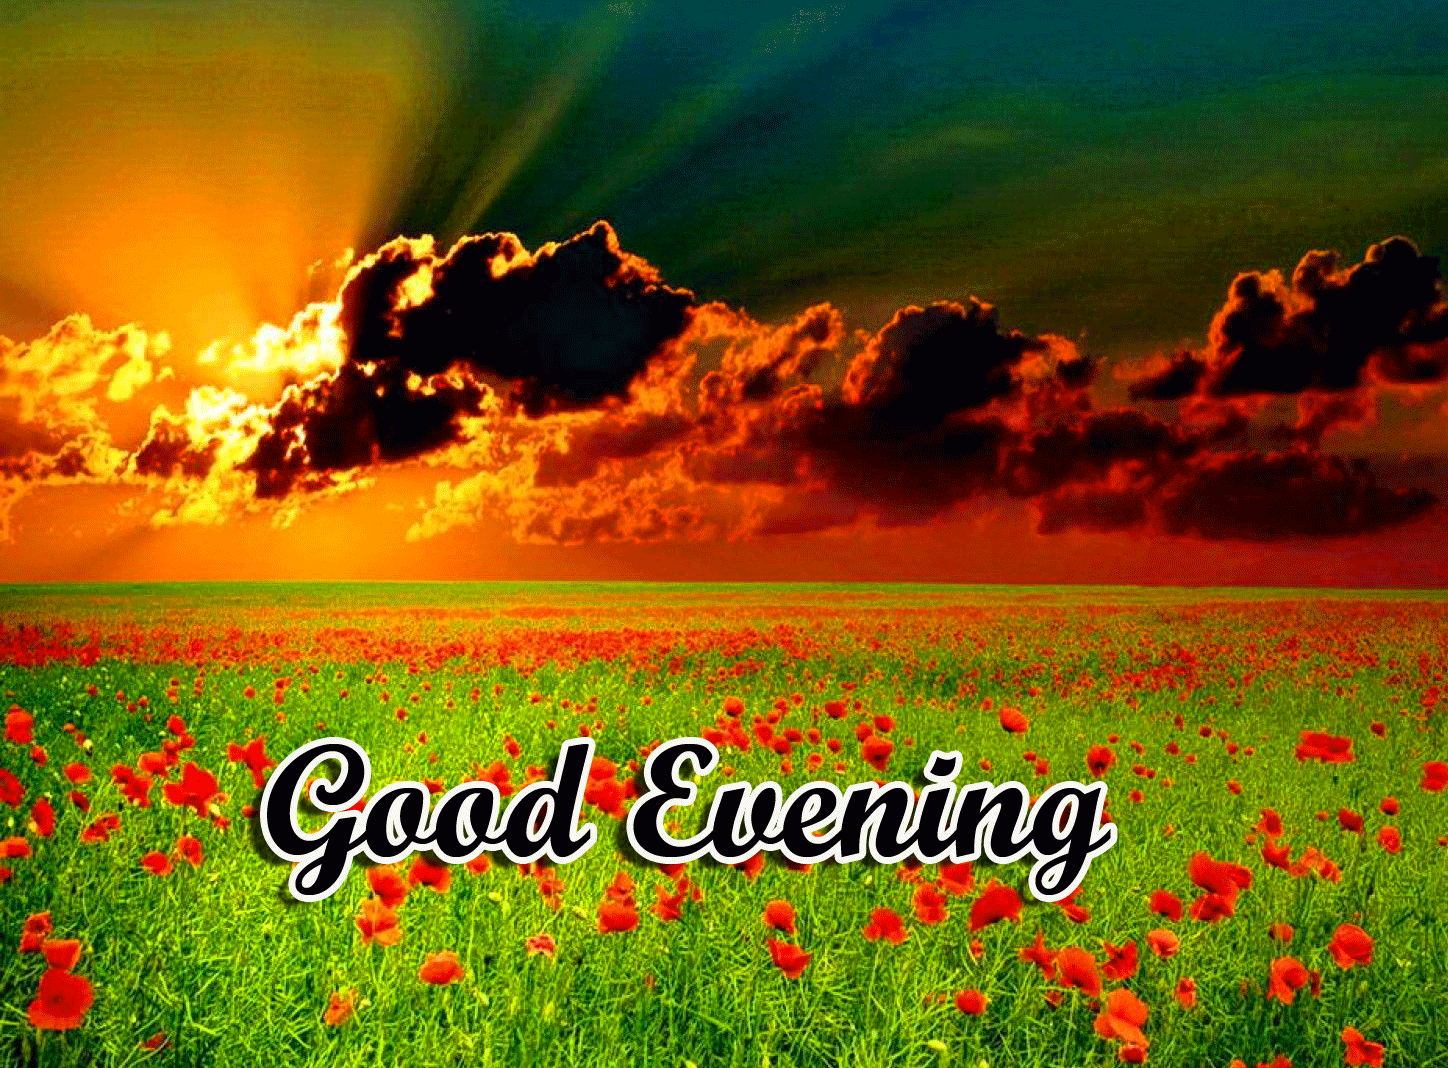 Good Evening Wishes Images Download 35